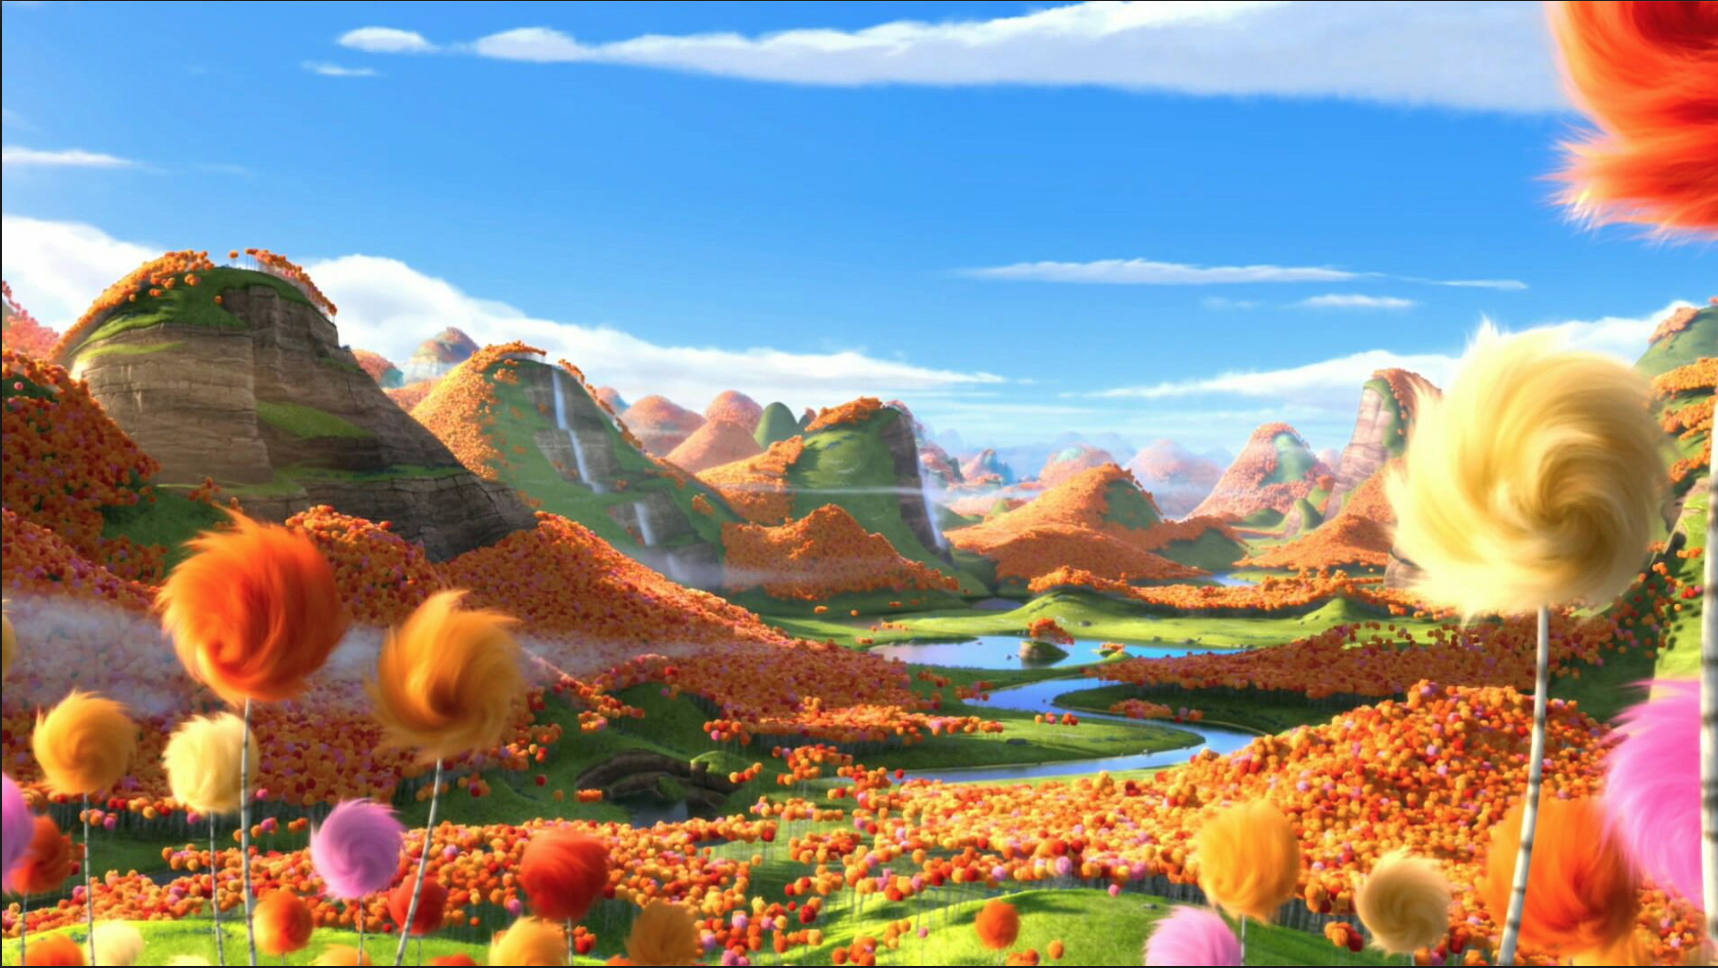 Forest Of Truffula Trees From The Lorax In